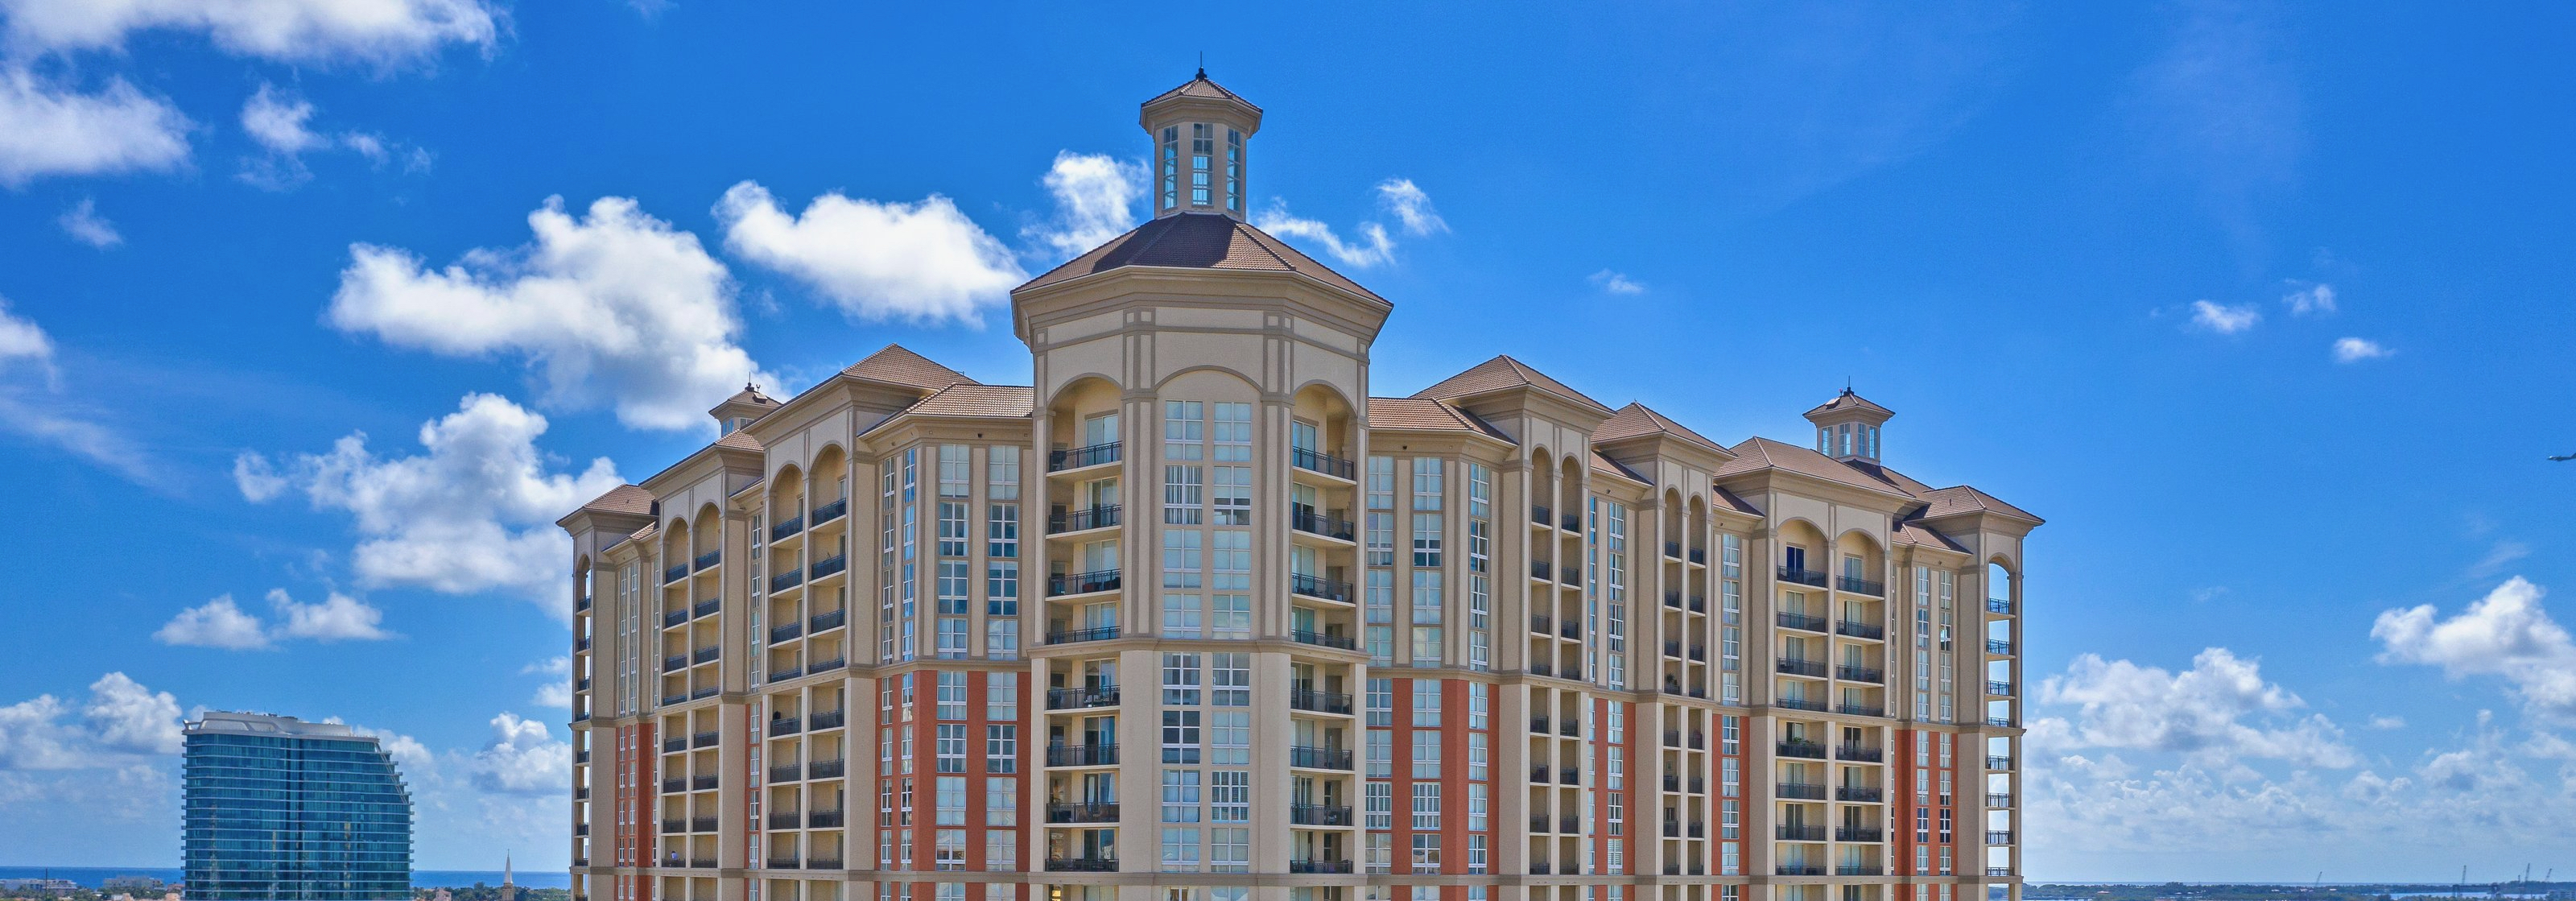 Cityplace South Tower Condos | Cityplace South Tower For Rent | 550 Okeechobee Blvd, West Palm Beach, FL 33401